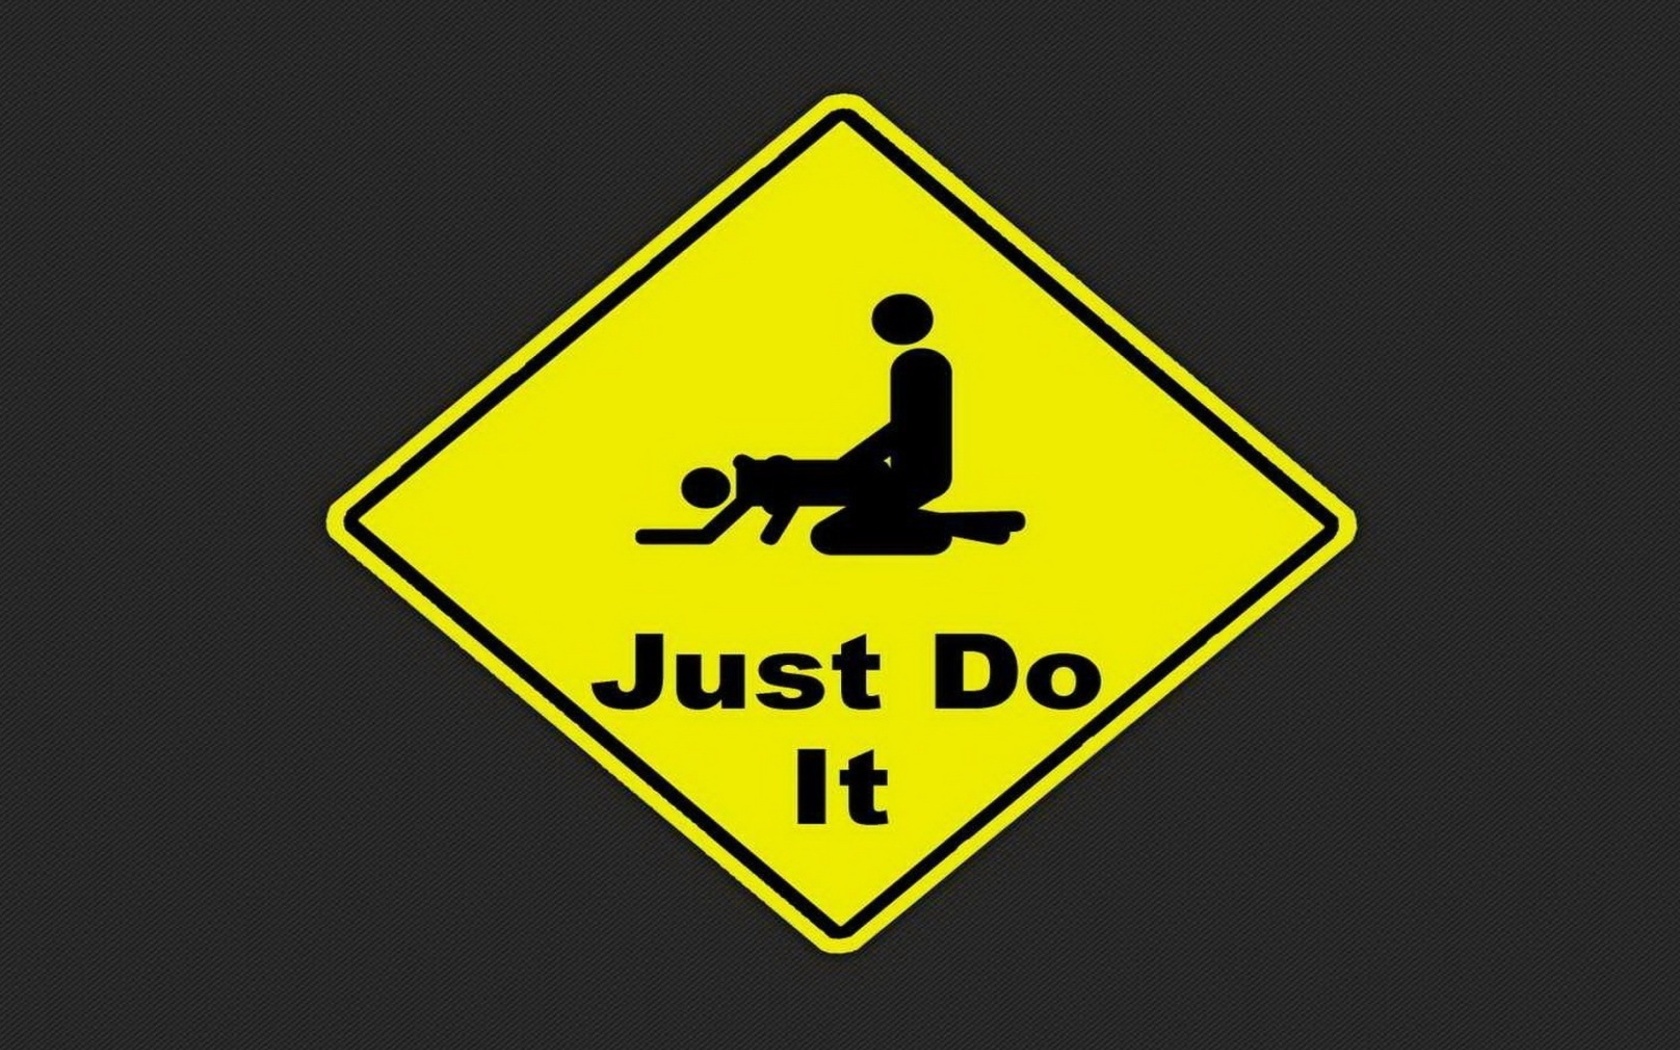 Just Do It Funny Sign wallpaper 1680x1050